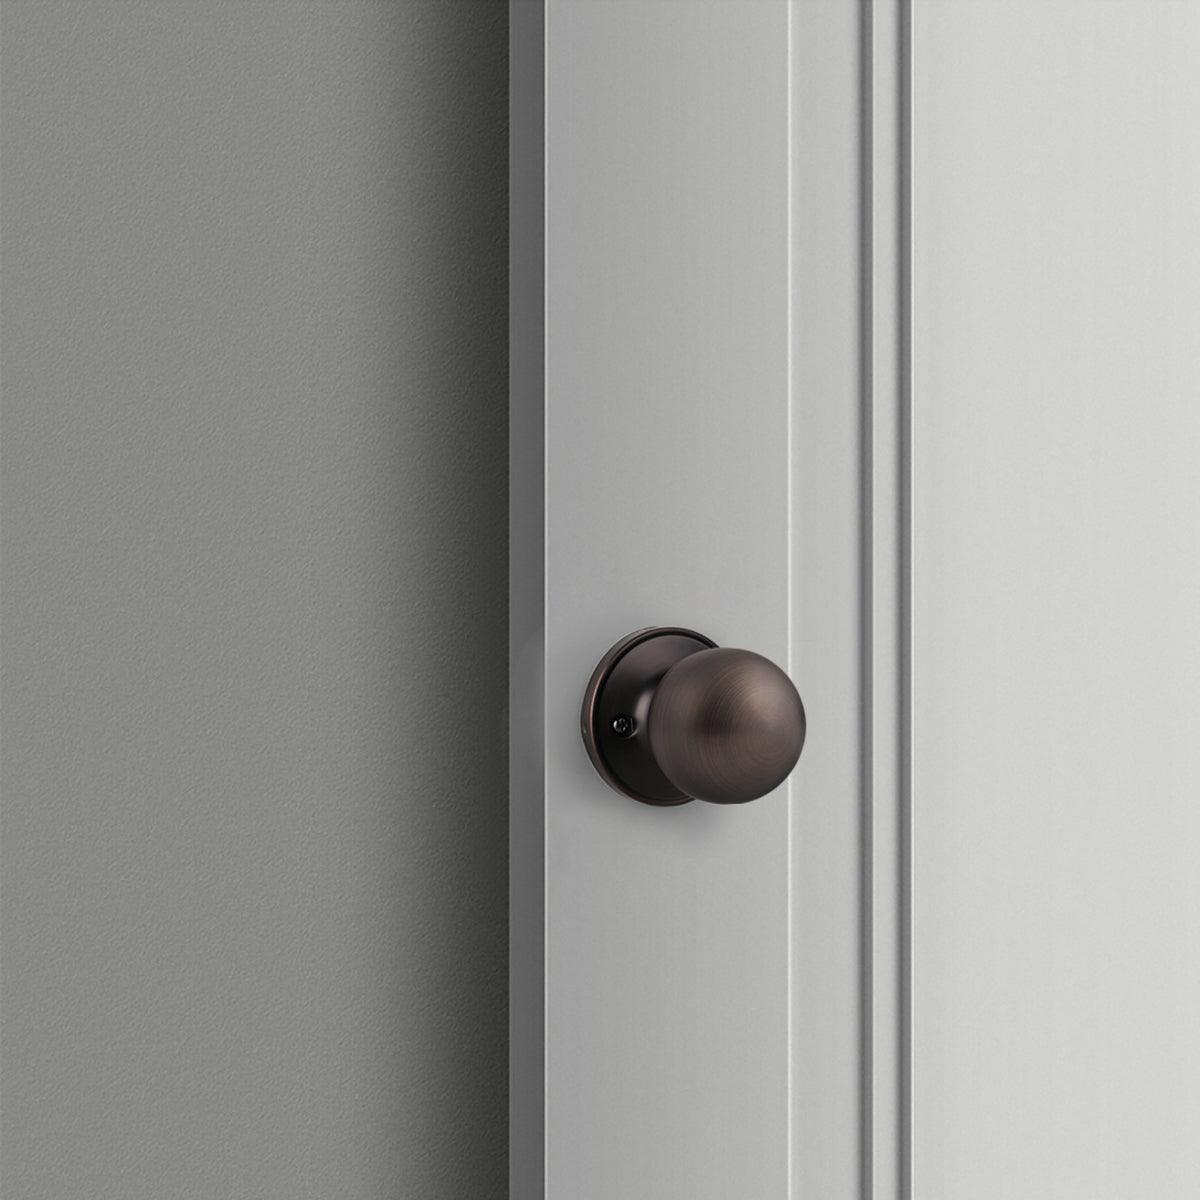 Round Ball Knobs Entrance Privacy Passage Dummy Door Lock Knob, Oil Rubbed Bronze Finish DL607ORB